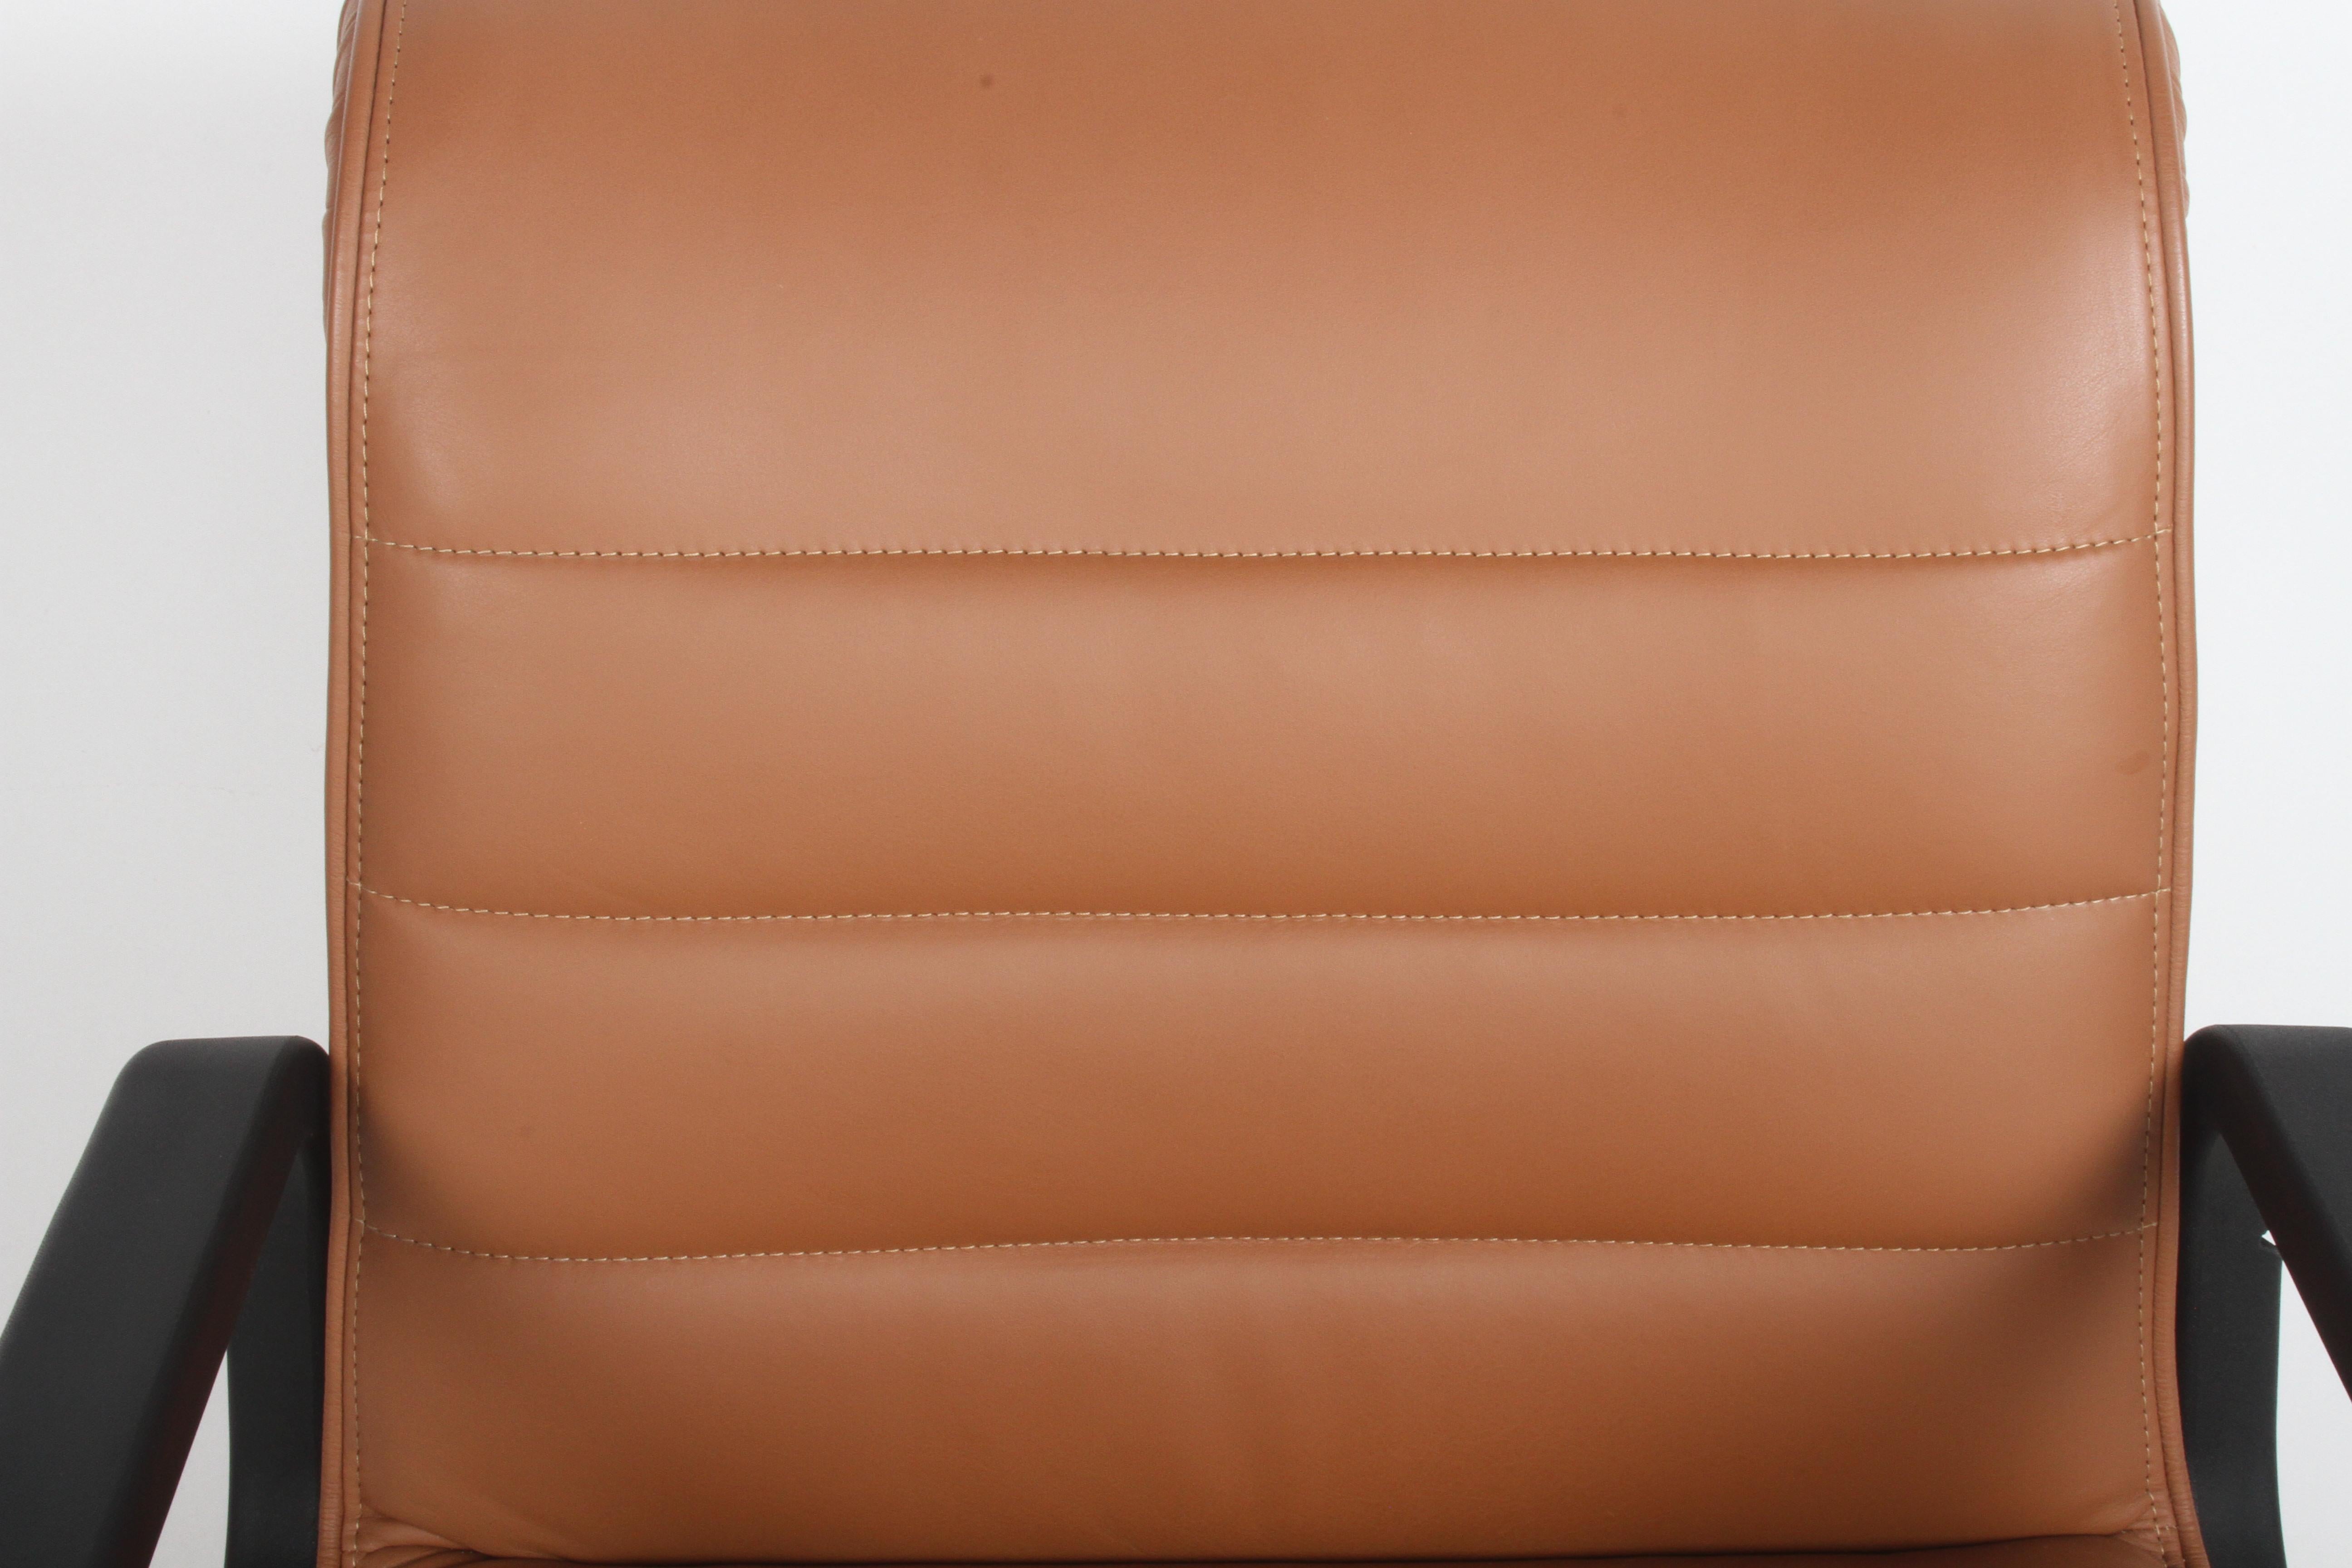 Richard Sapper for Knoll Desk, Task, Executive or Conference Chair -Tan Leather 1